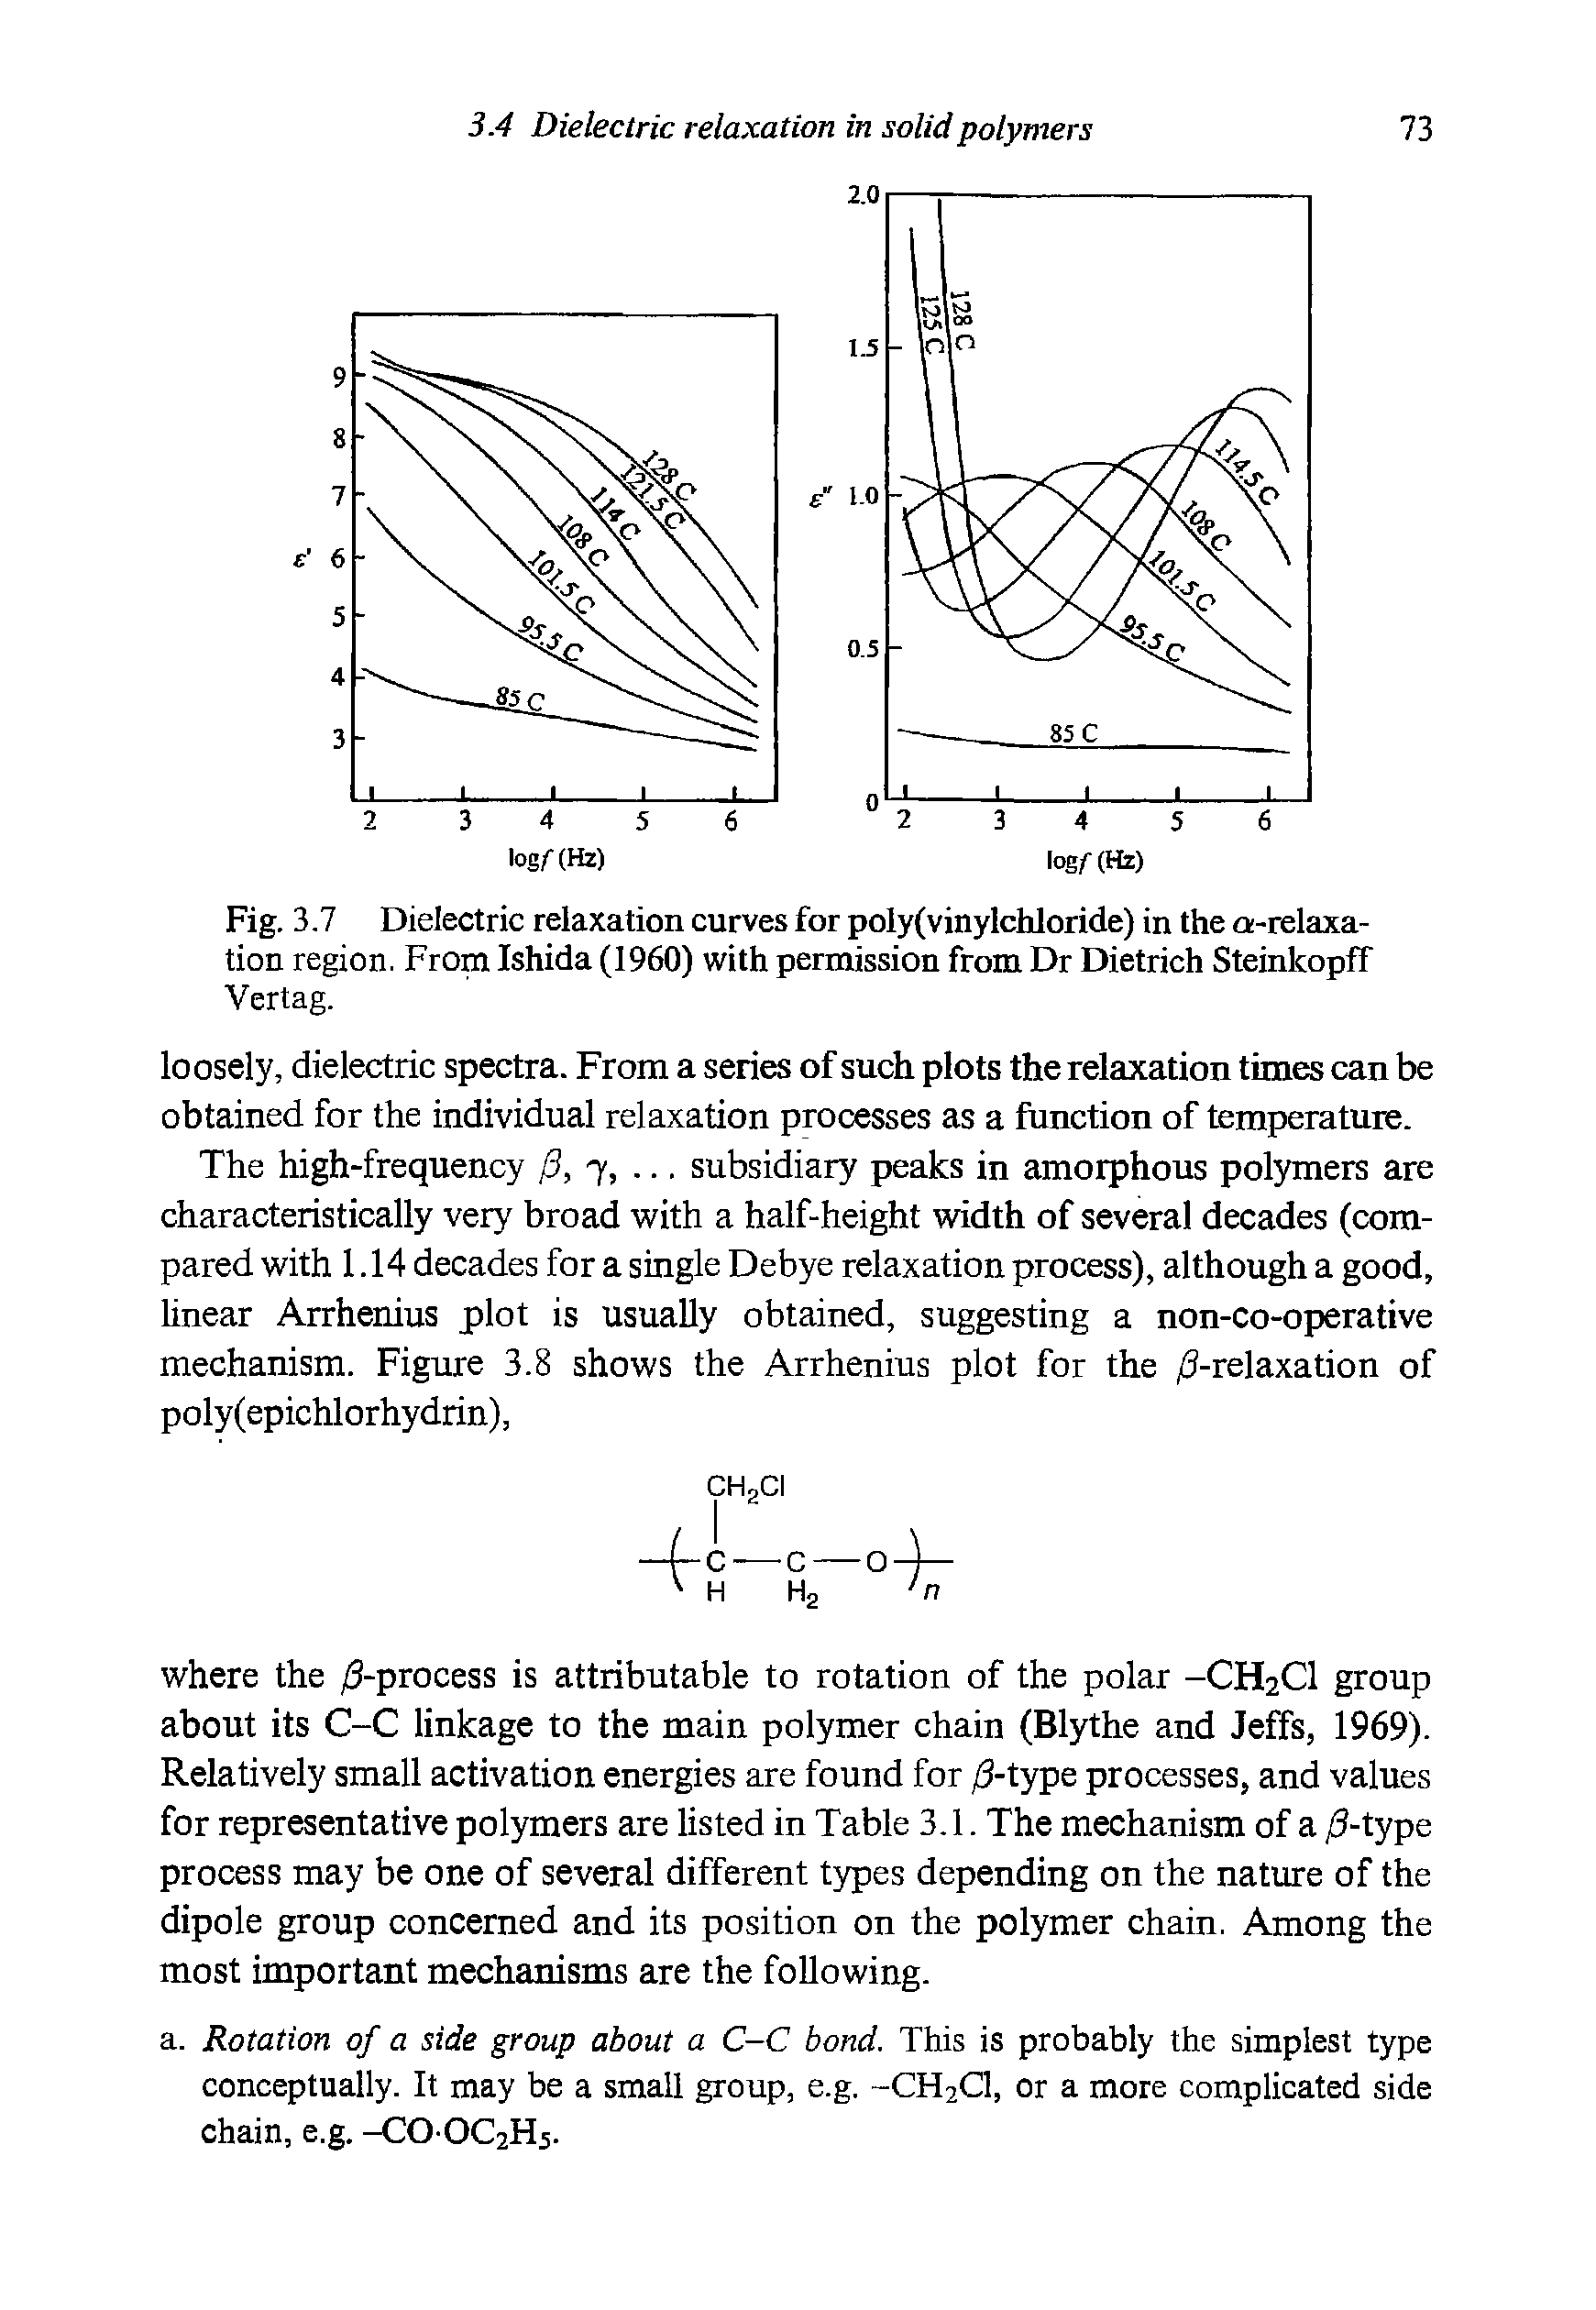 Fig. 3.7 Dielectric relaxation curves for poly(vinylchloride) in the a-relaxa-tion region. From Ishida (1960) with permission from Dr Dietrich Steinlcopff Vertag.